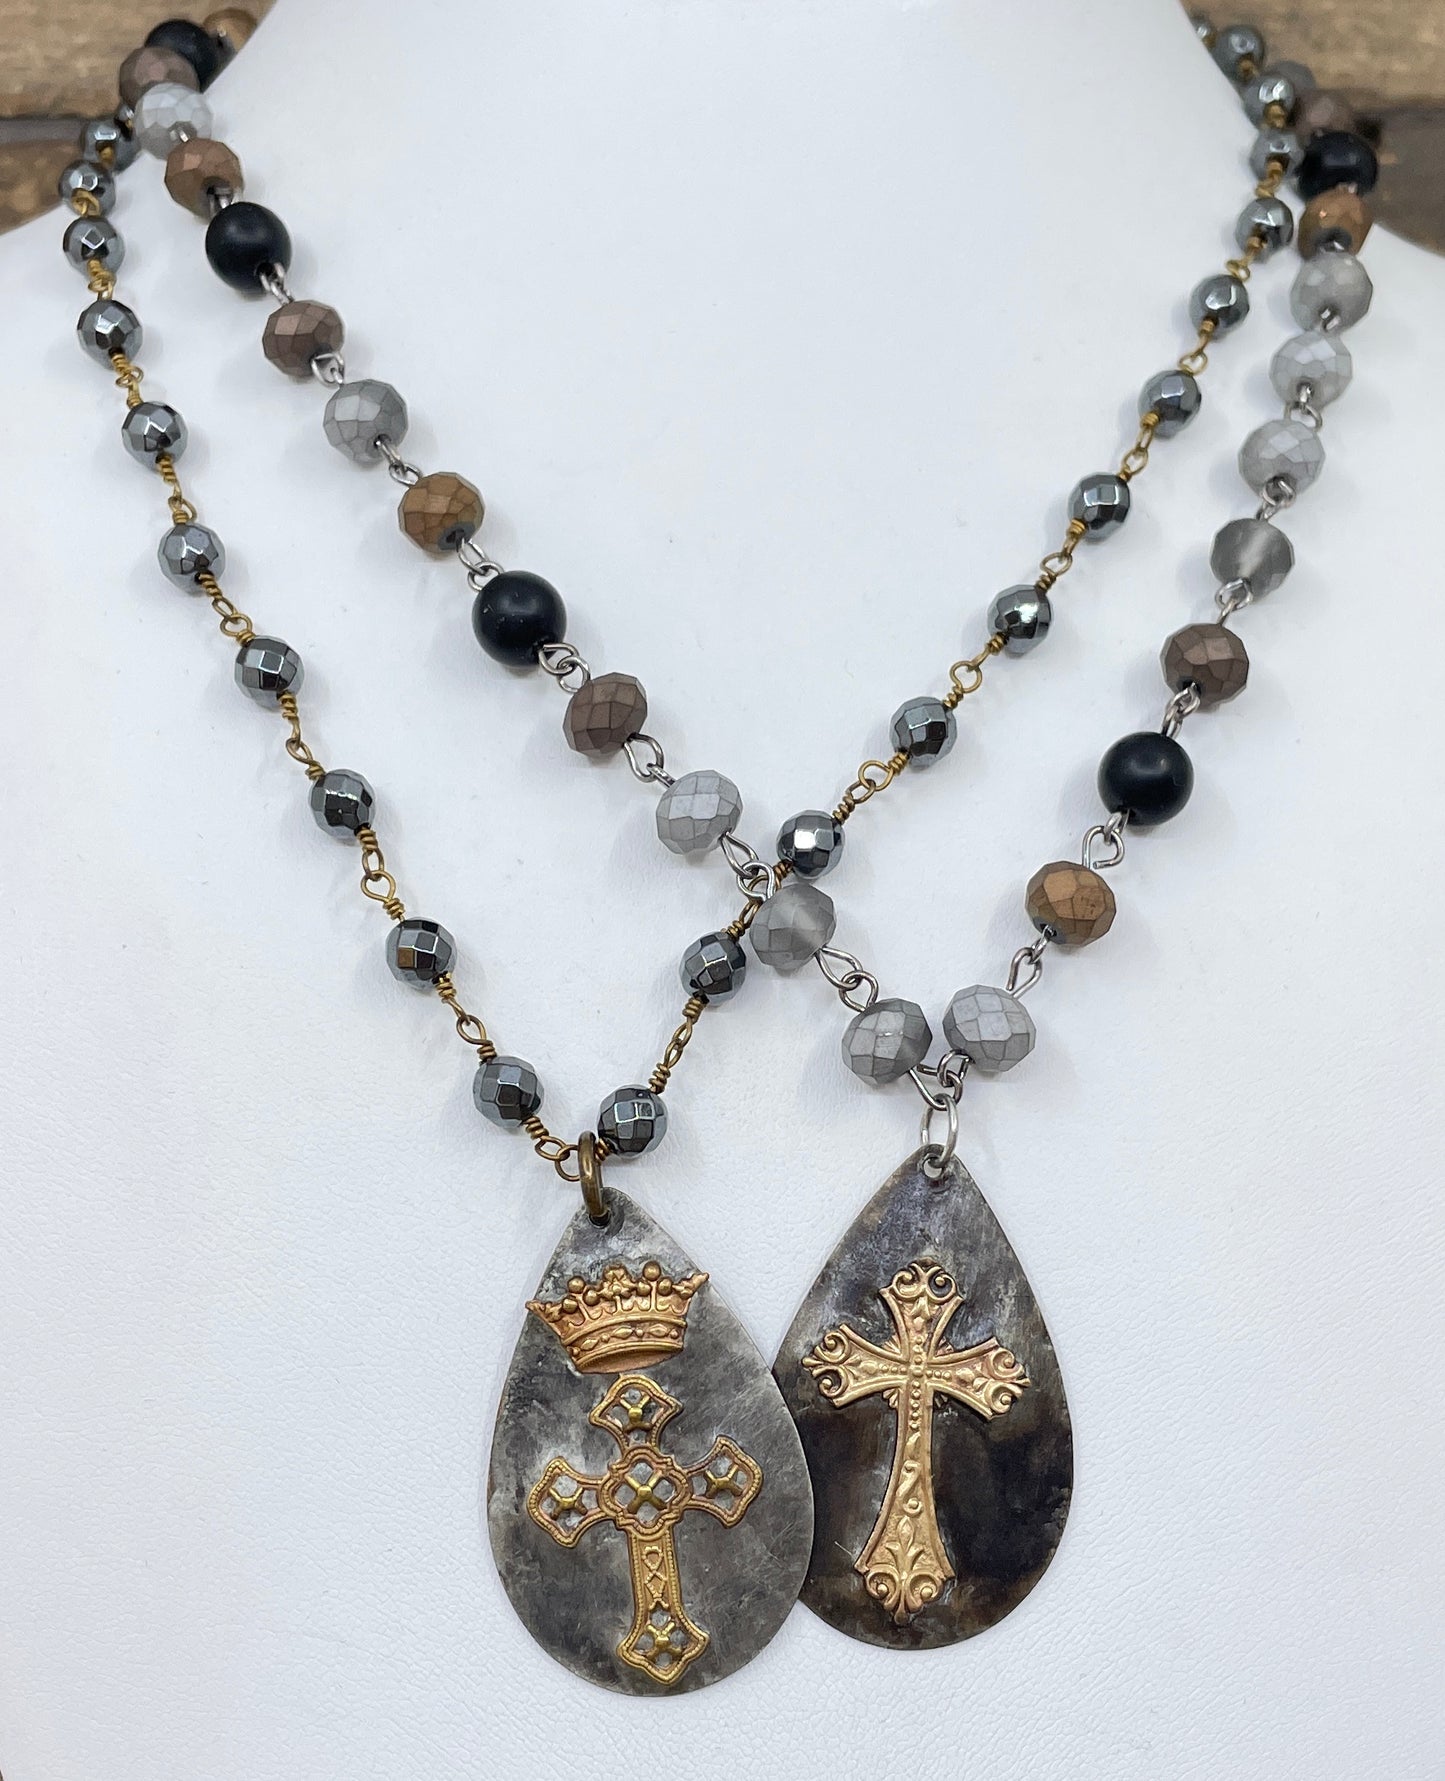 Vintage Soldered Cross Pendant Rosary Necklace